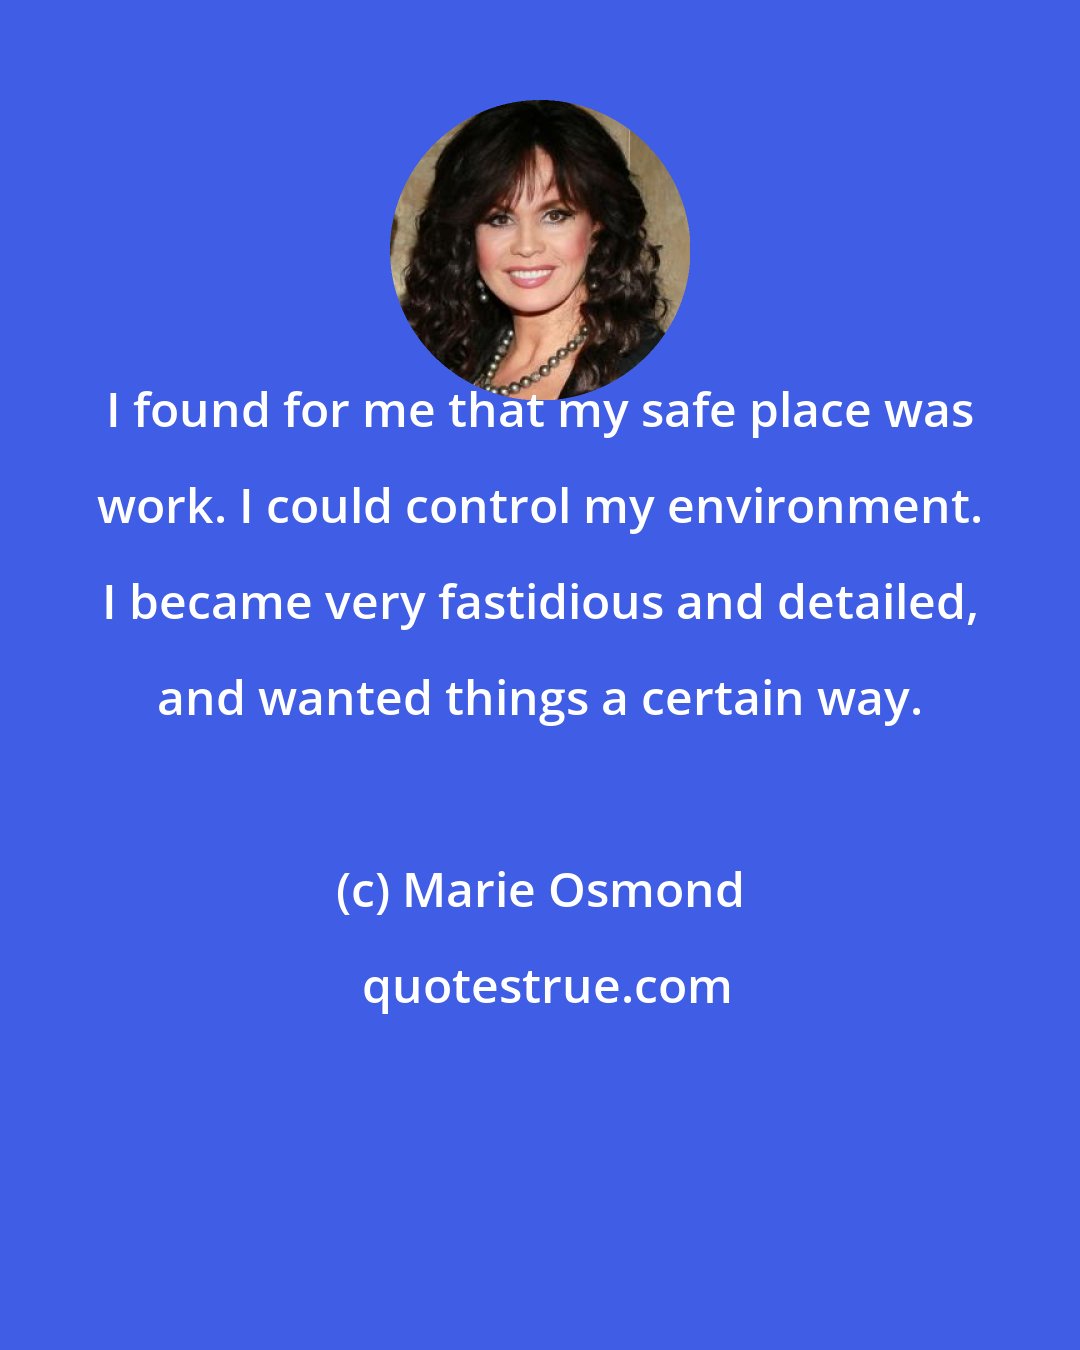 Marie Osmond: I found for me that my safe place was work. I could control my environment. I became very fastidious and detailed, and wanted things a certain way.